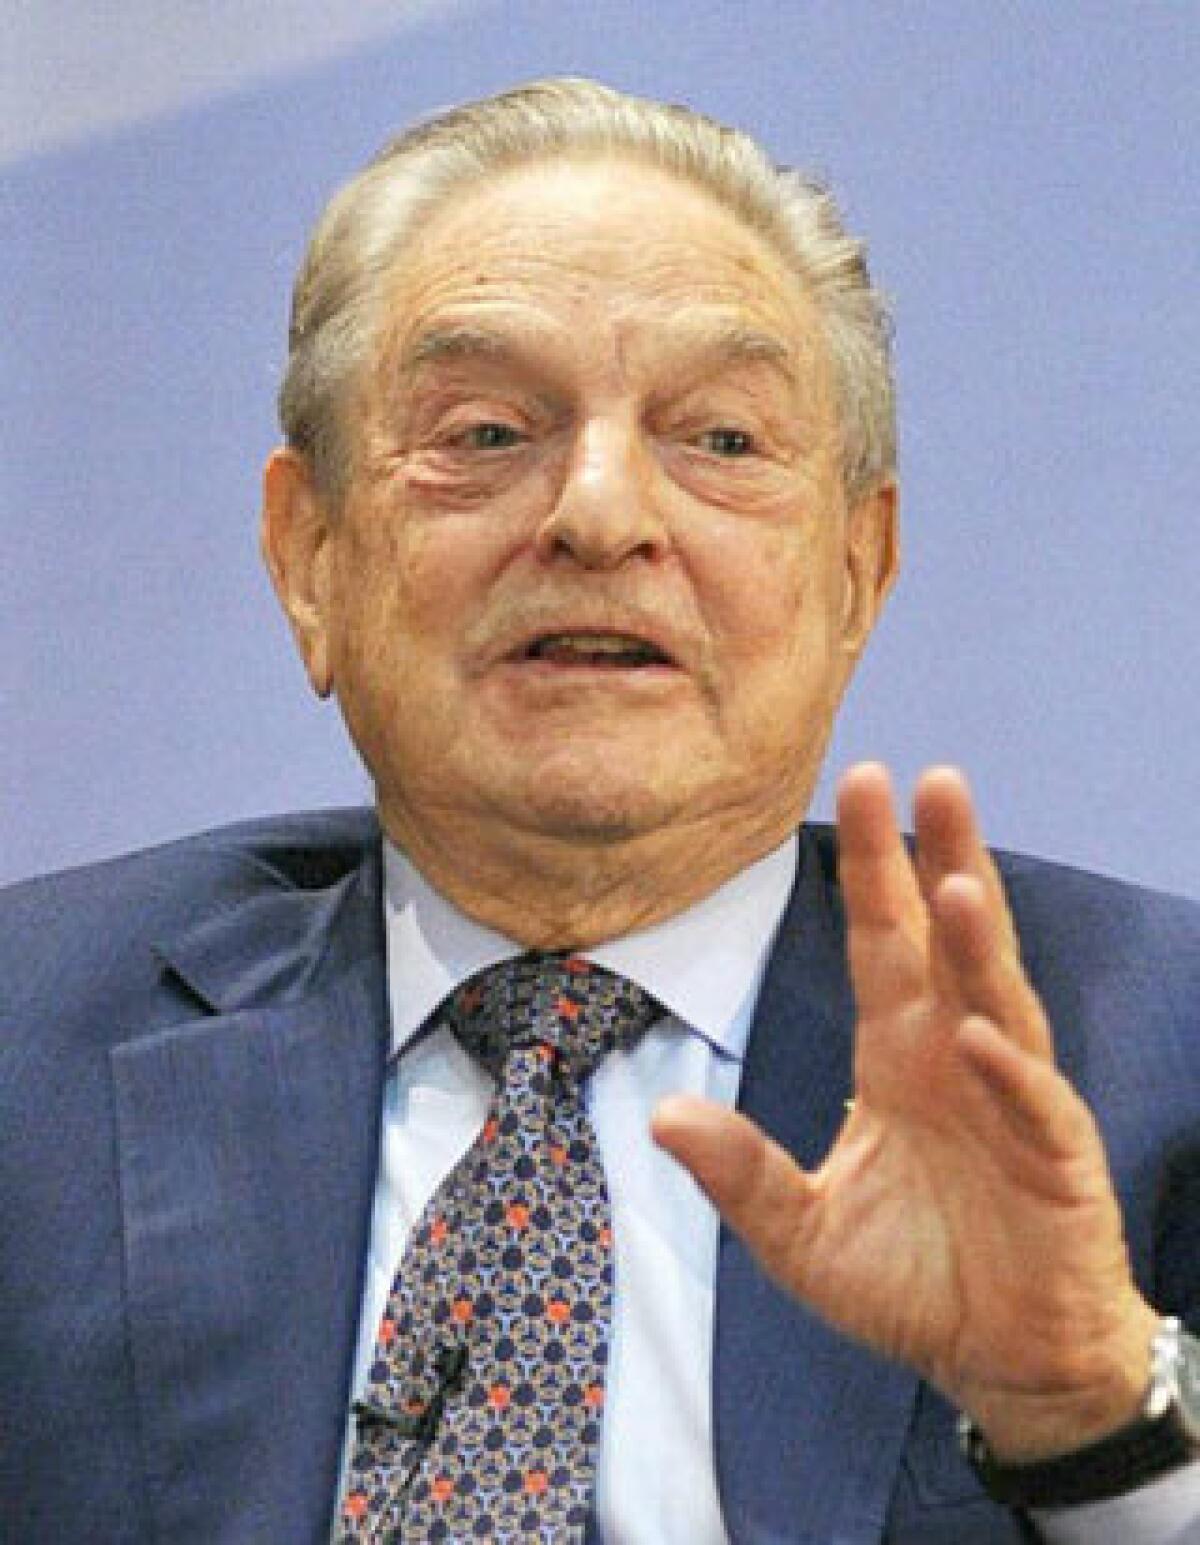 Among the wealthy liberals behind Democracy Alliance is billionaire investor George Soros, shown above speaking at the University of Hong Kong in 2010.